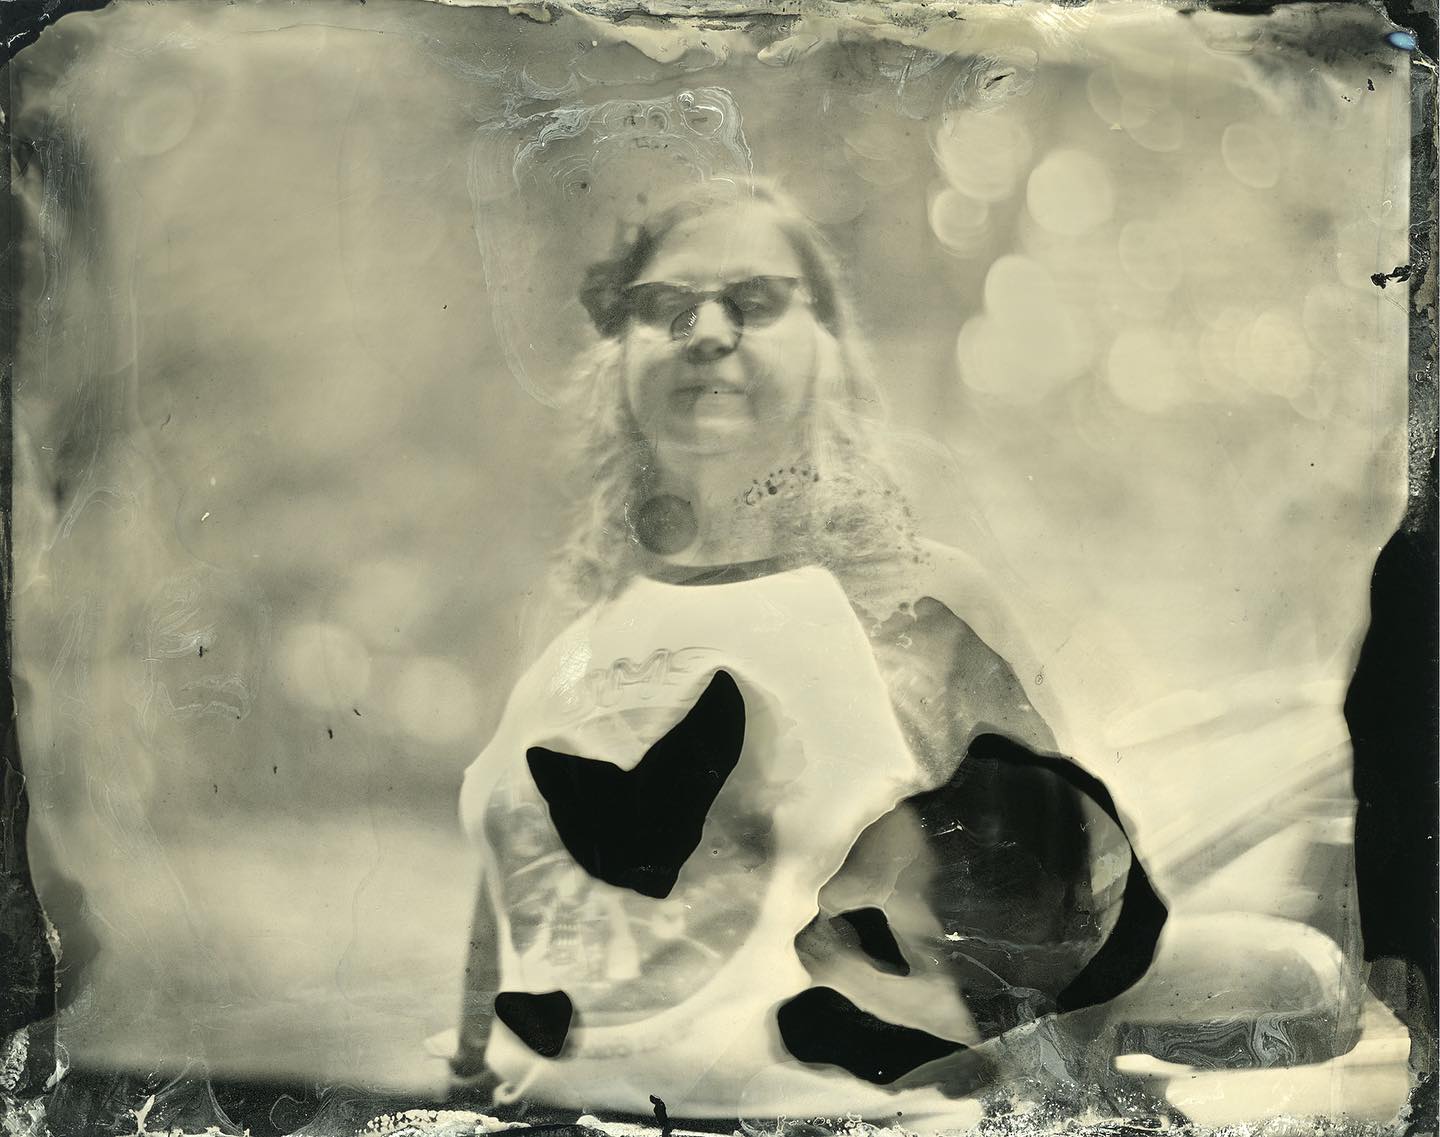 Laura

While I had everything set up, I couldnât resist making a second tintype this weekend. This one misses the veiling from the first, but makes up for it with both developer island *and* developer burns. I have to say I love the roughly heart-shaped perfectly place island, though. #tintype #tintypephotography #wetplatecollodion #largeformat #speedgraphic #aeroektar